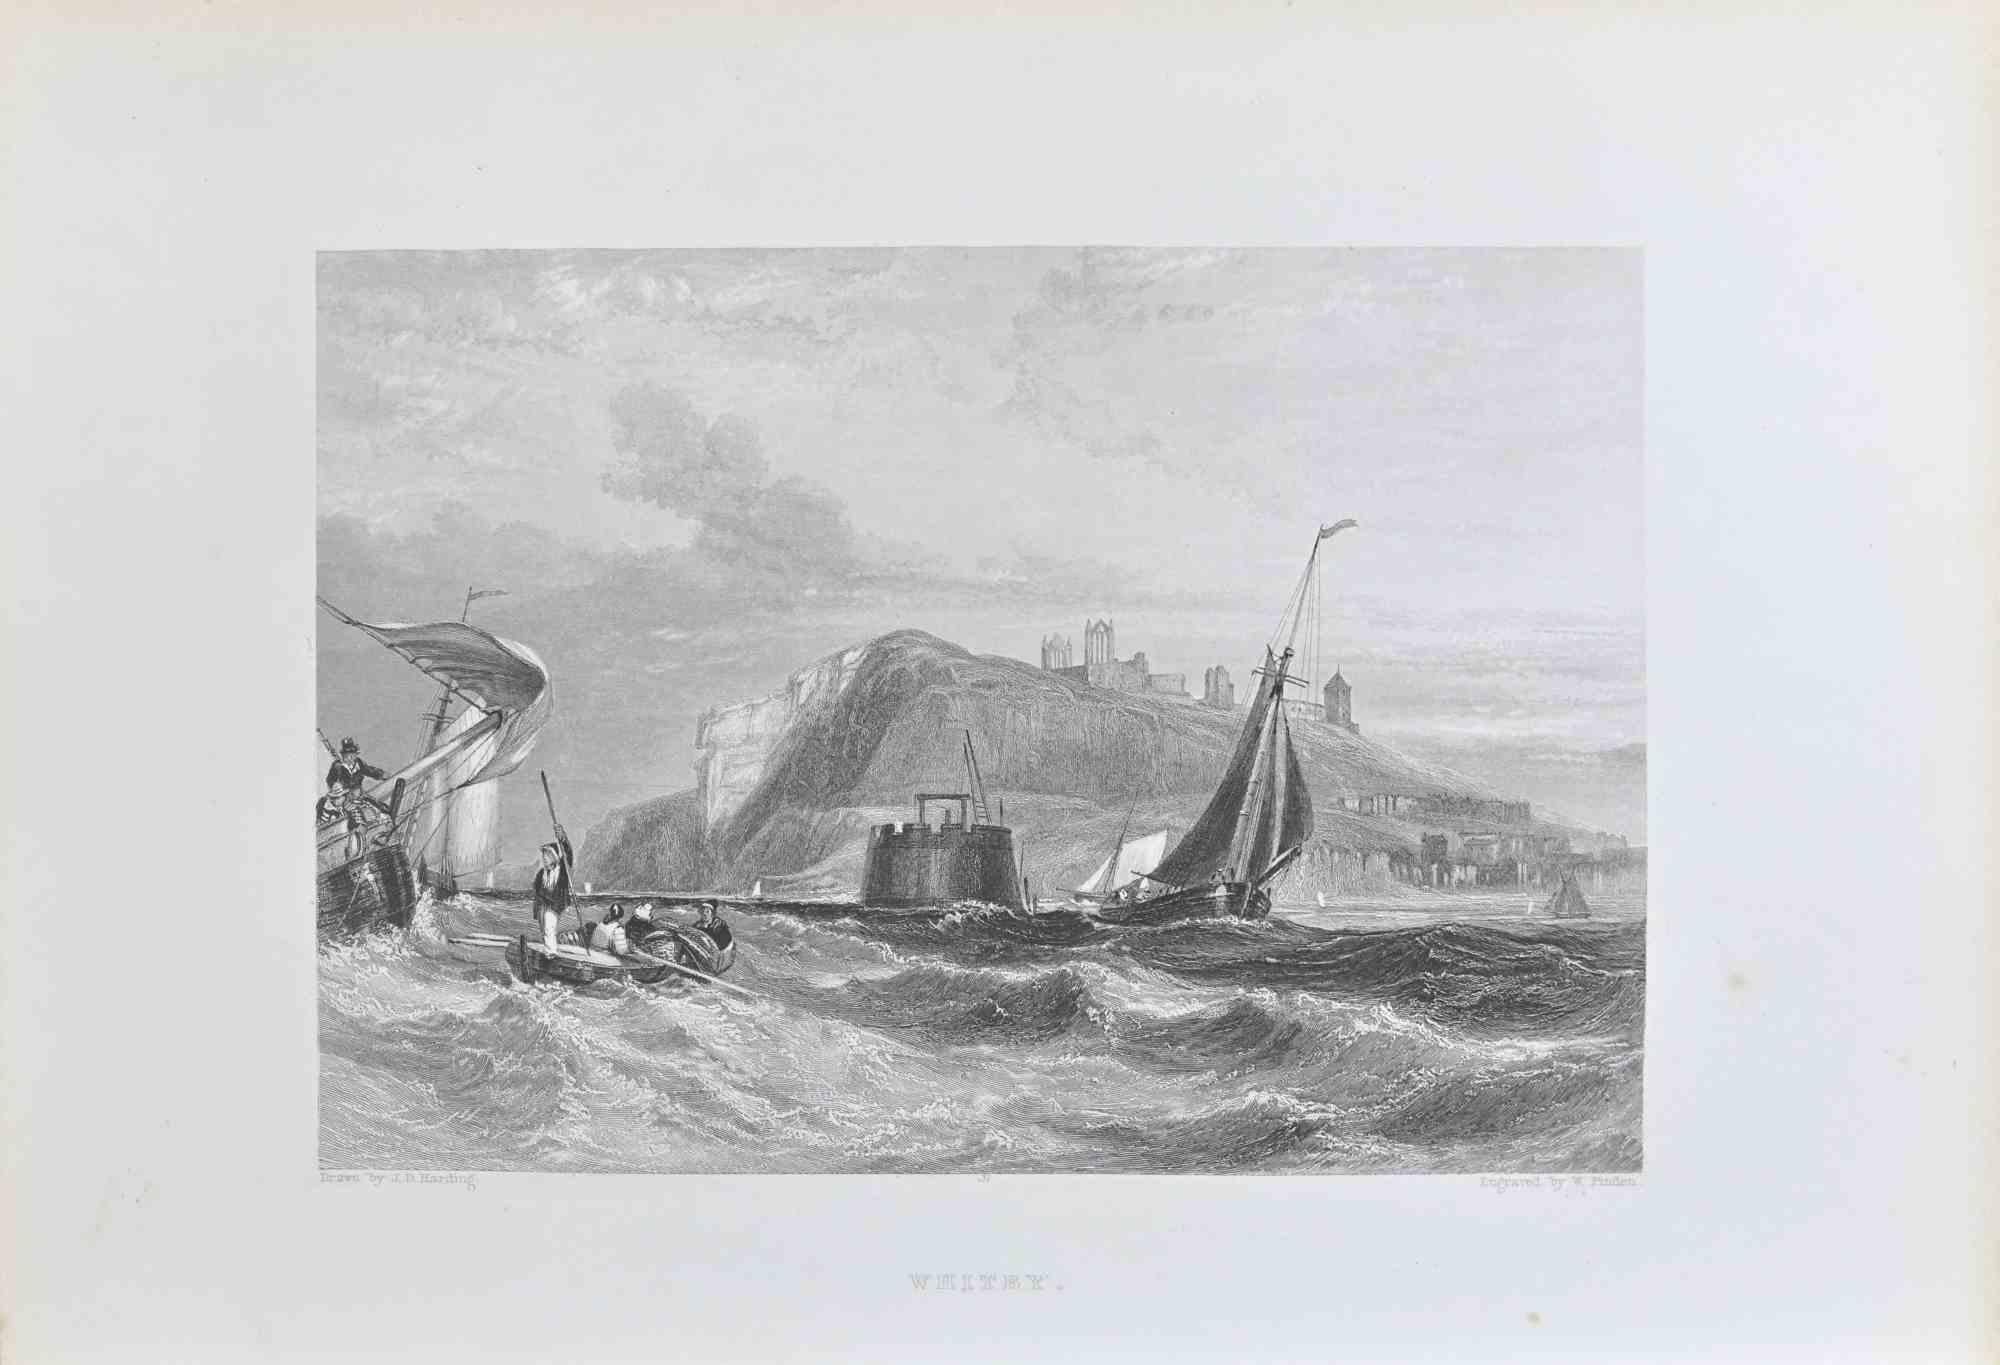 Whitby is a lithograph on paper realized by the artist James Duffield Harding.

Signed on the plate on the lower left. Titled on the lower center. Engraved by W. Finden

The state of preservation is good, only a yellowed paper along the edge and